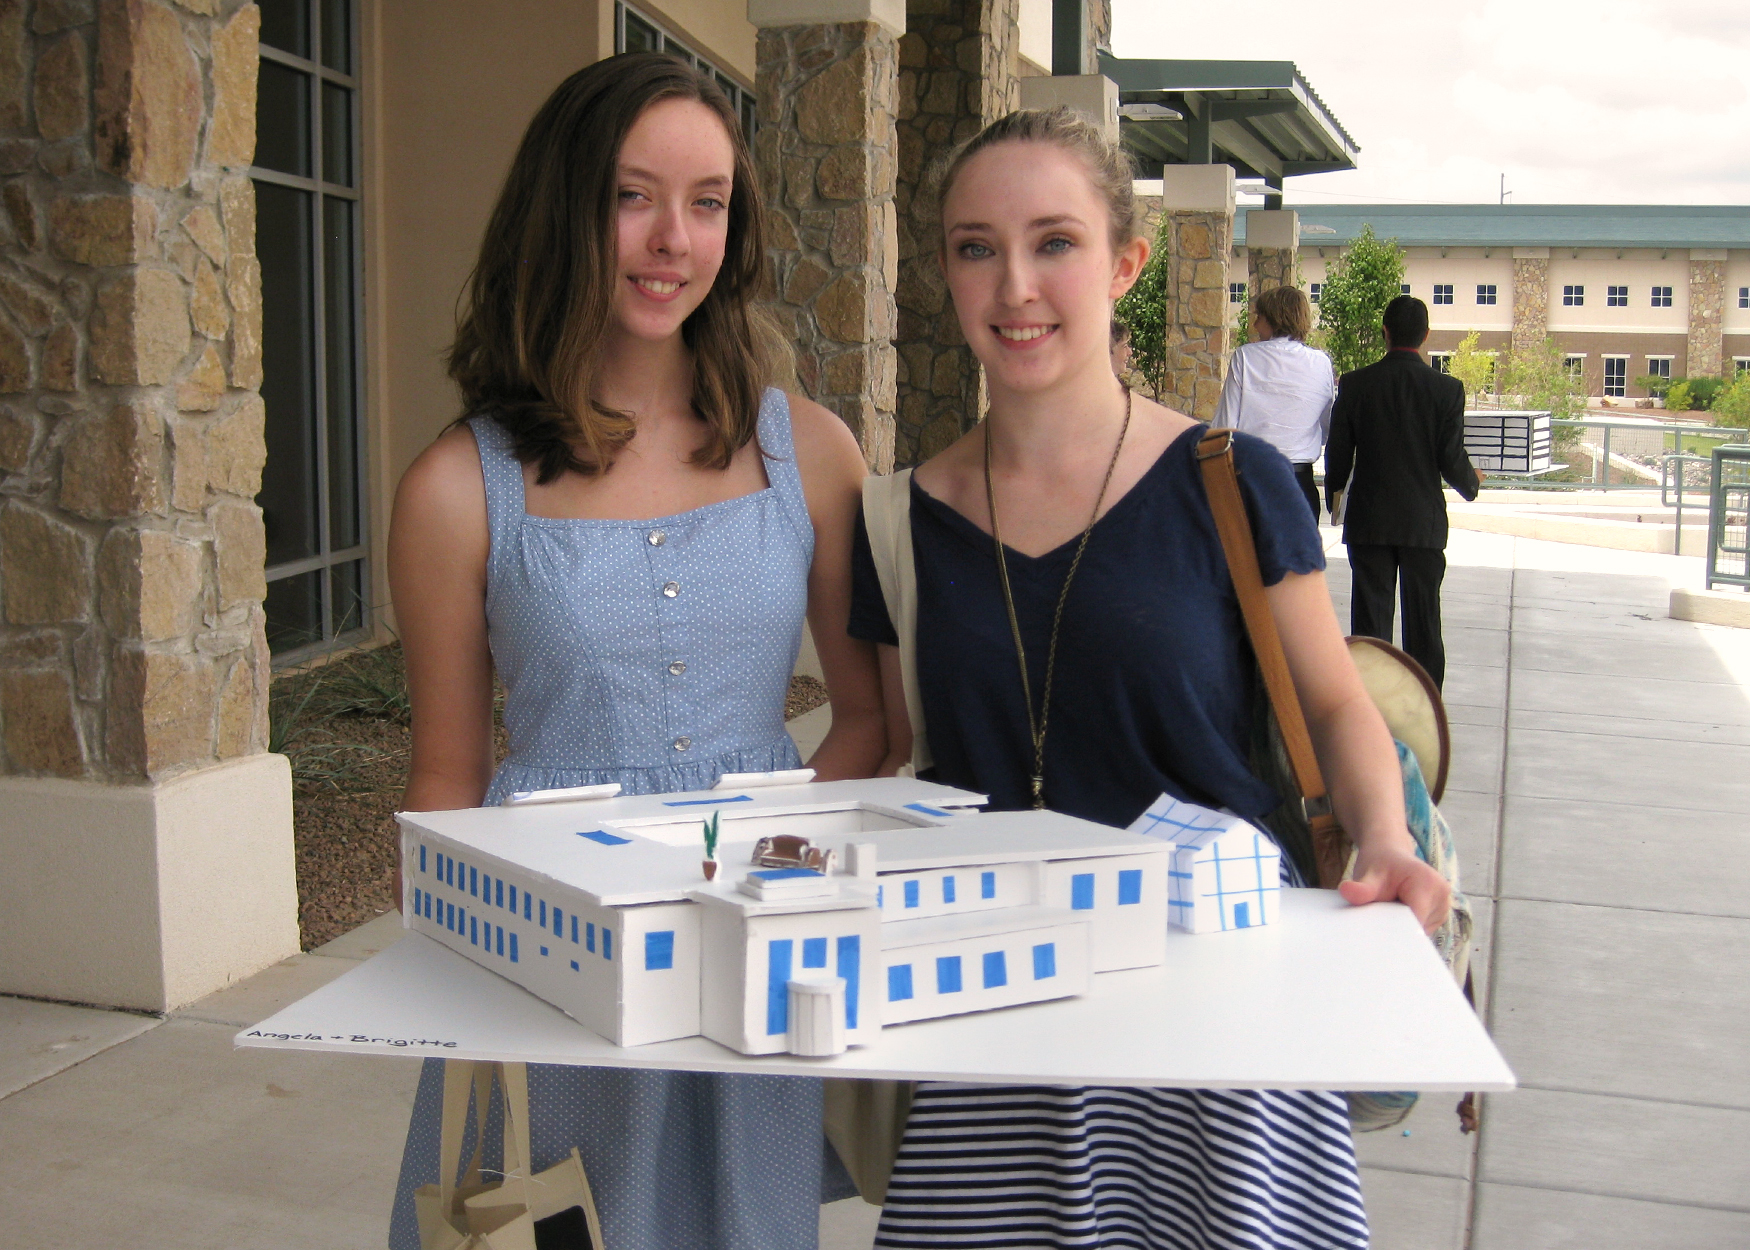 Two young women hold a model of a building concept they designed.